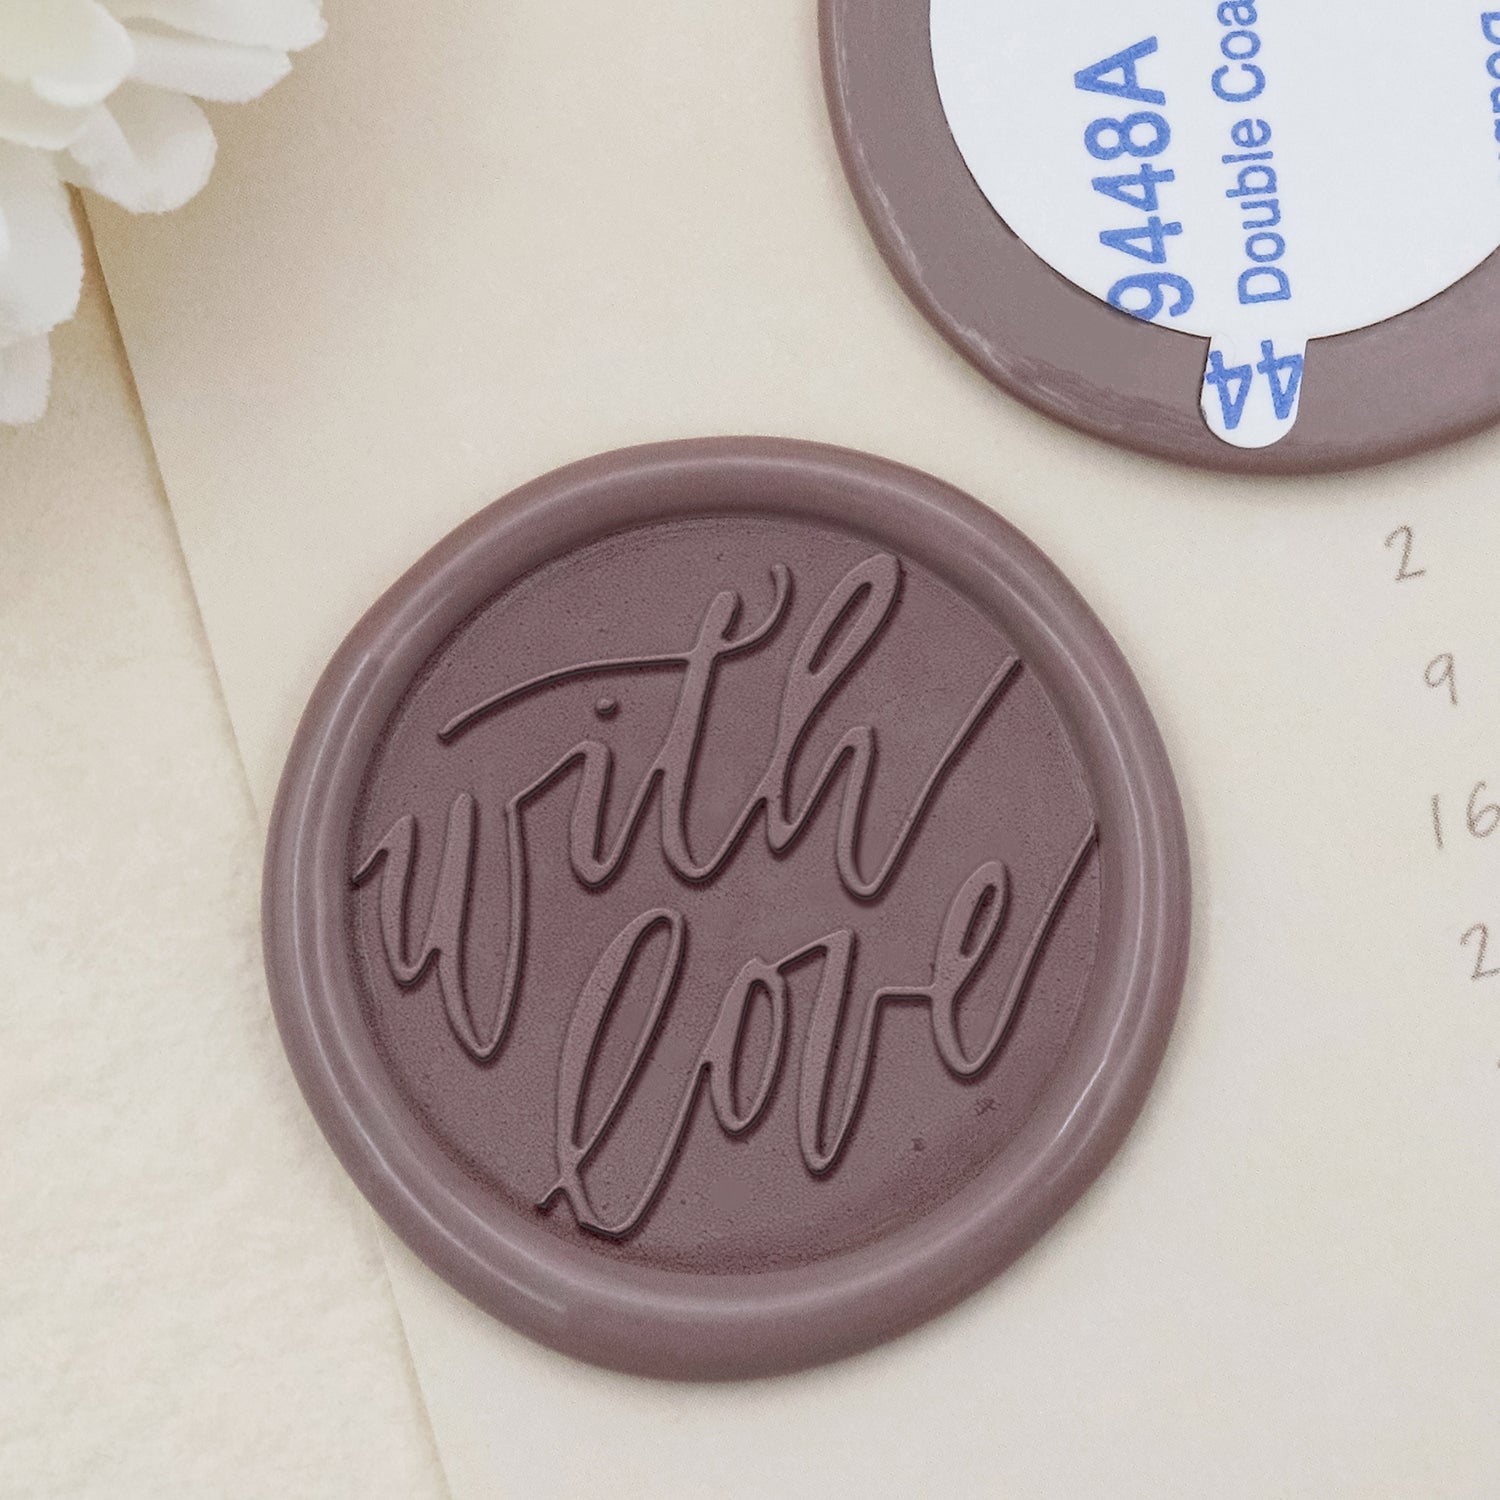 Stamprints Greeting Self-adhesive Wax Seal Stickers - With Love 1